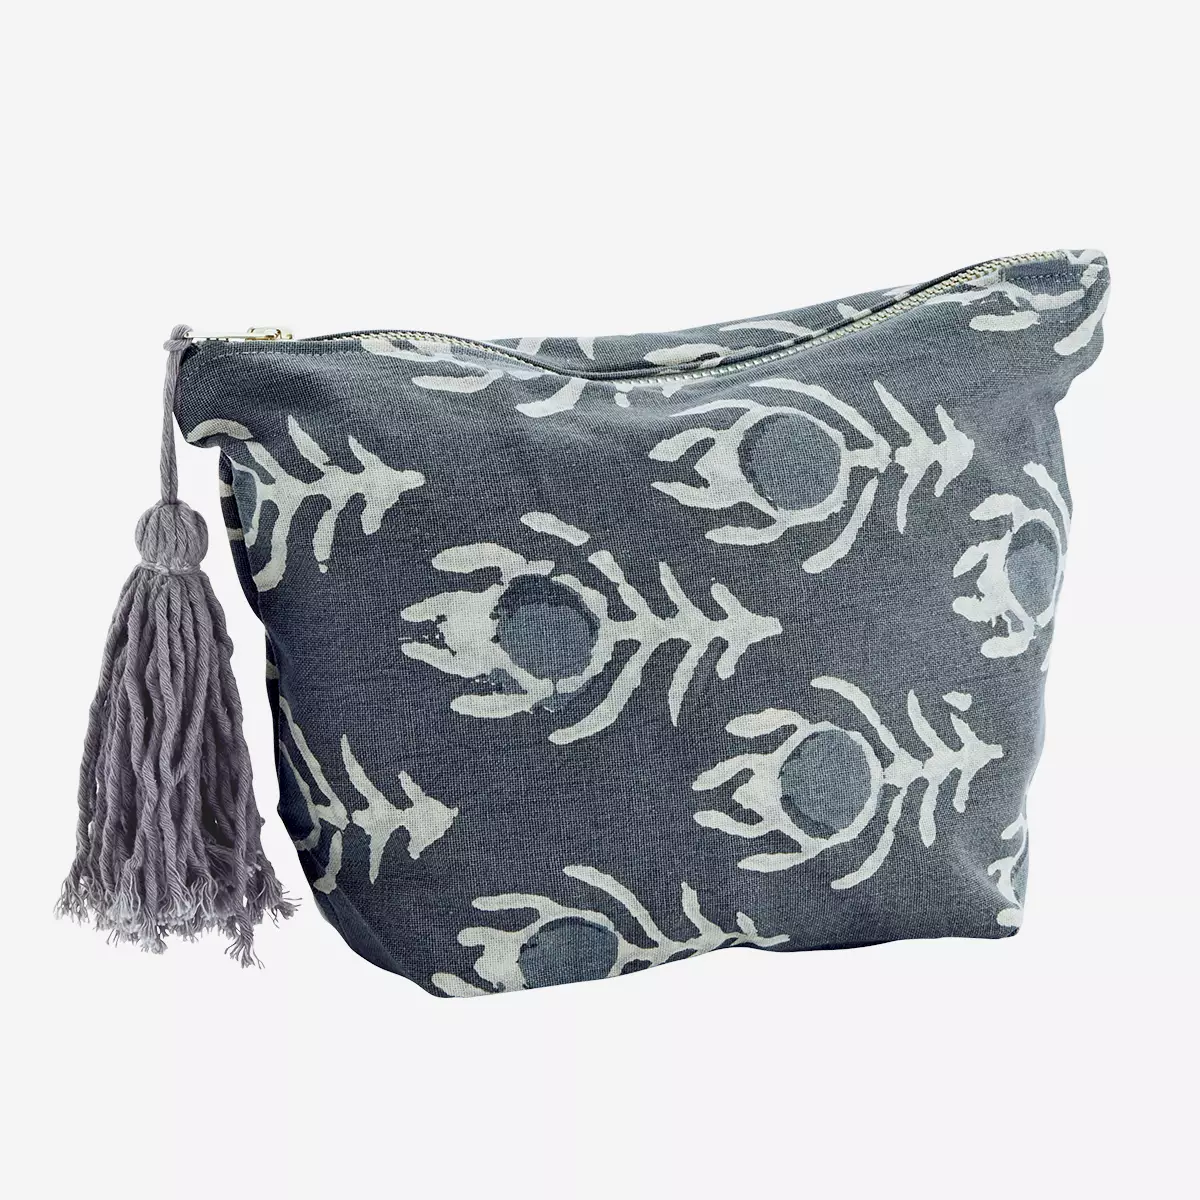 Off White and Blue Printed Washbag with Tassel